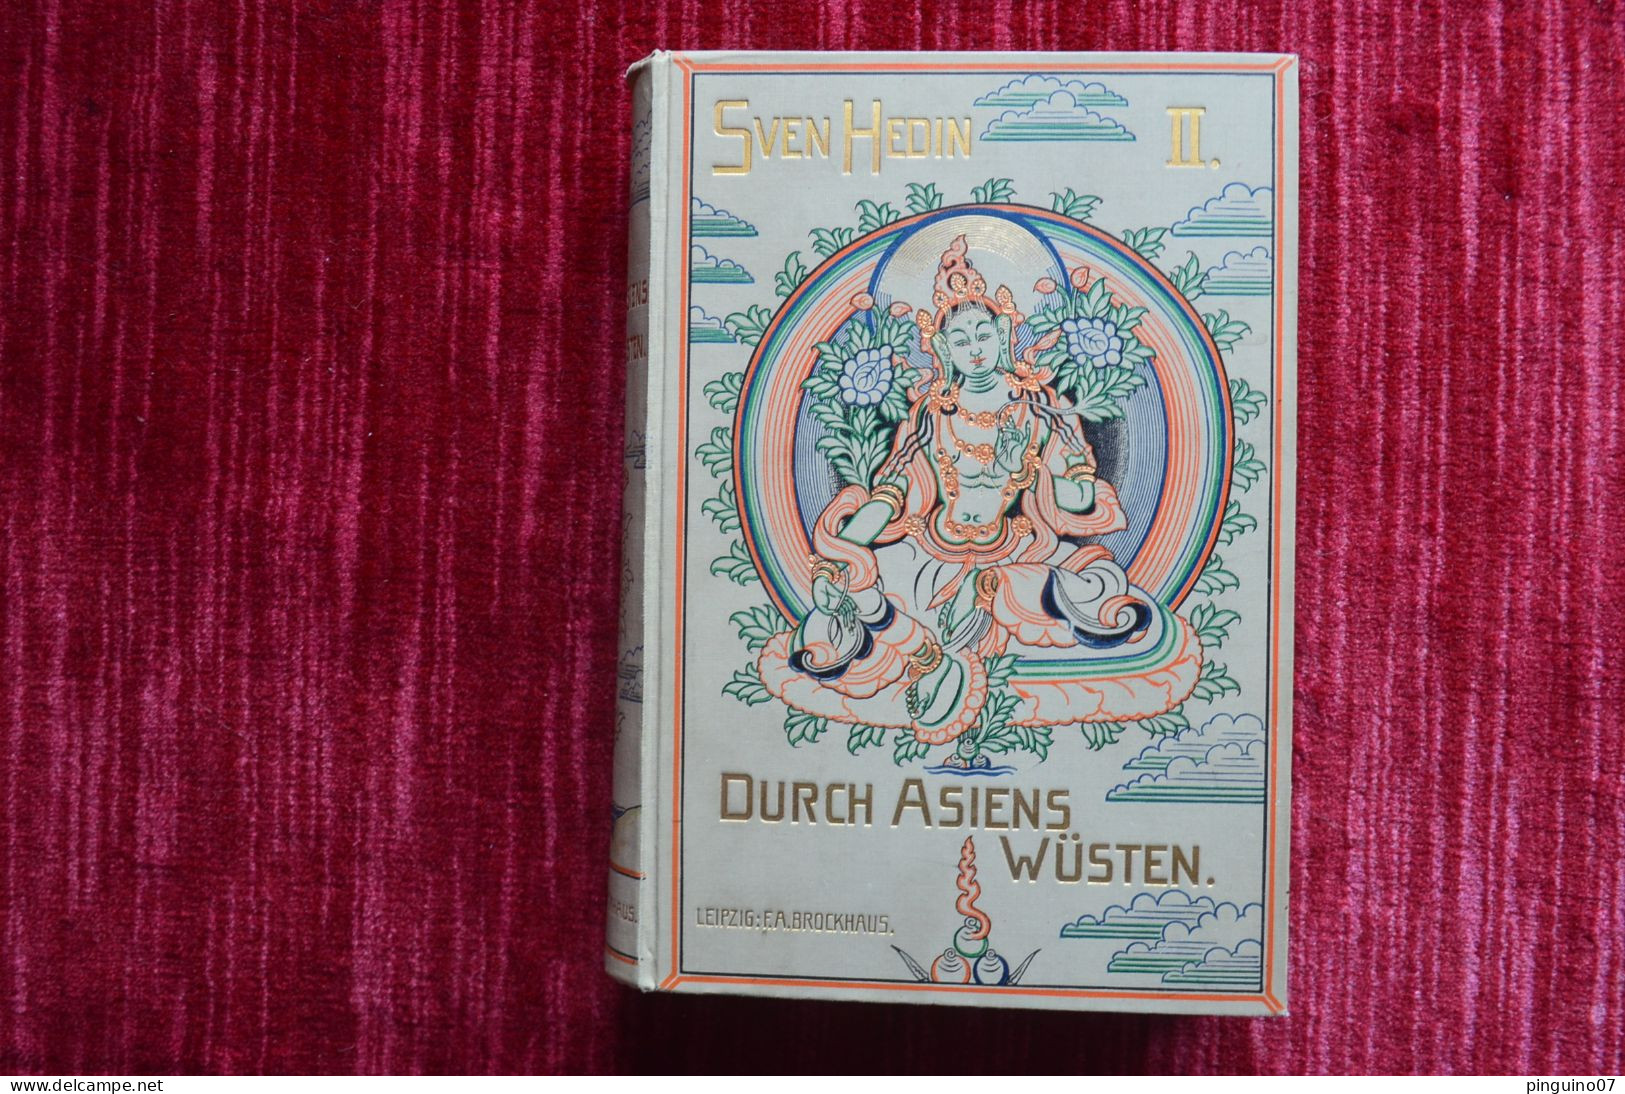 Signed Sven Hedin Durch Asiens Wûsten With Maps Explorer Explorateur Himalaya Mountaineering Escalade - Autographed